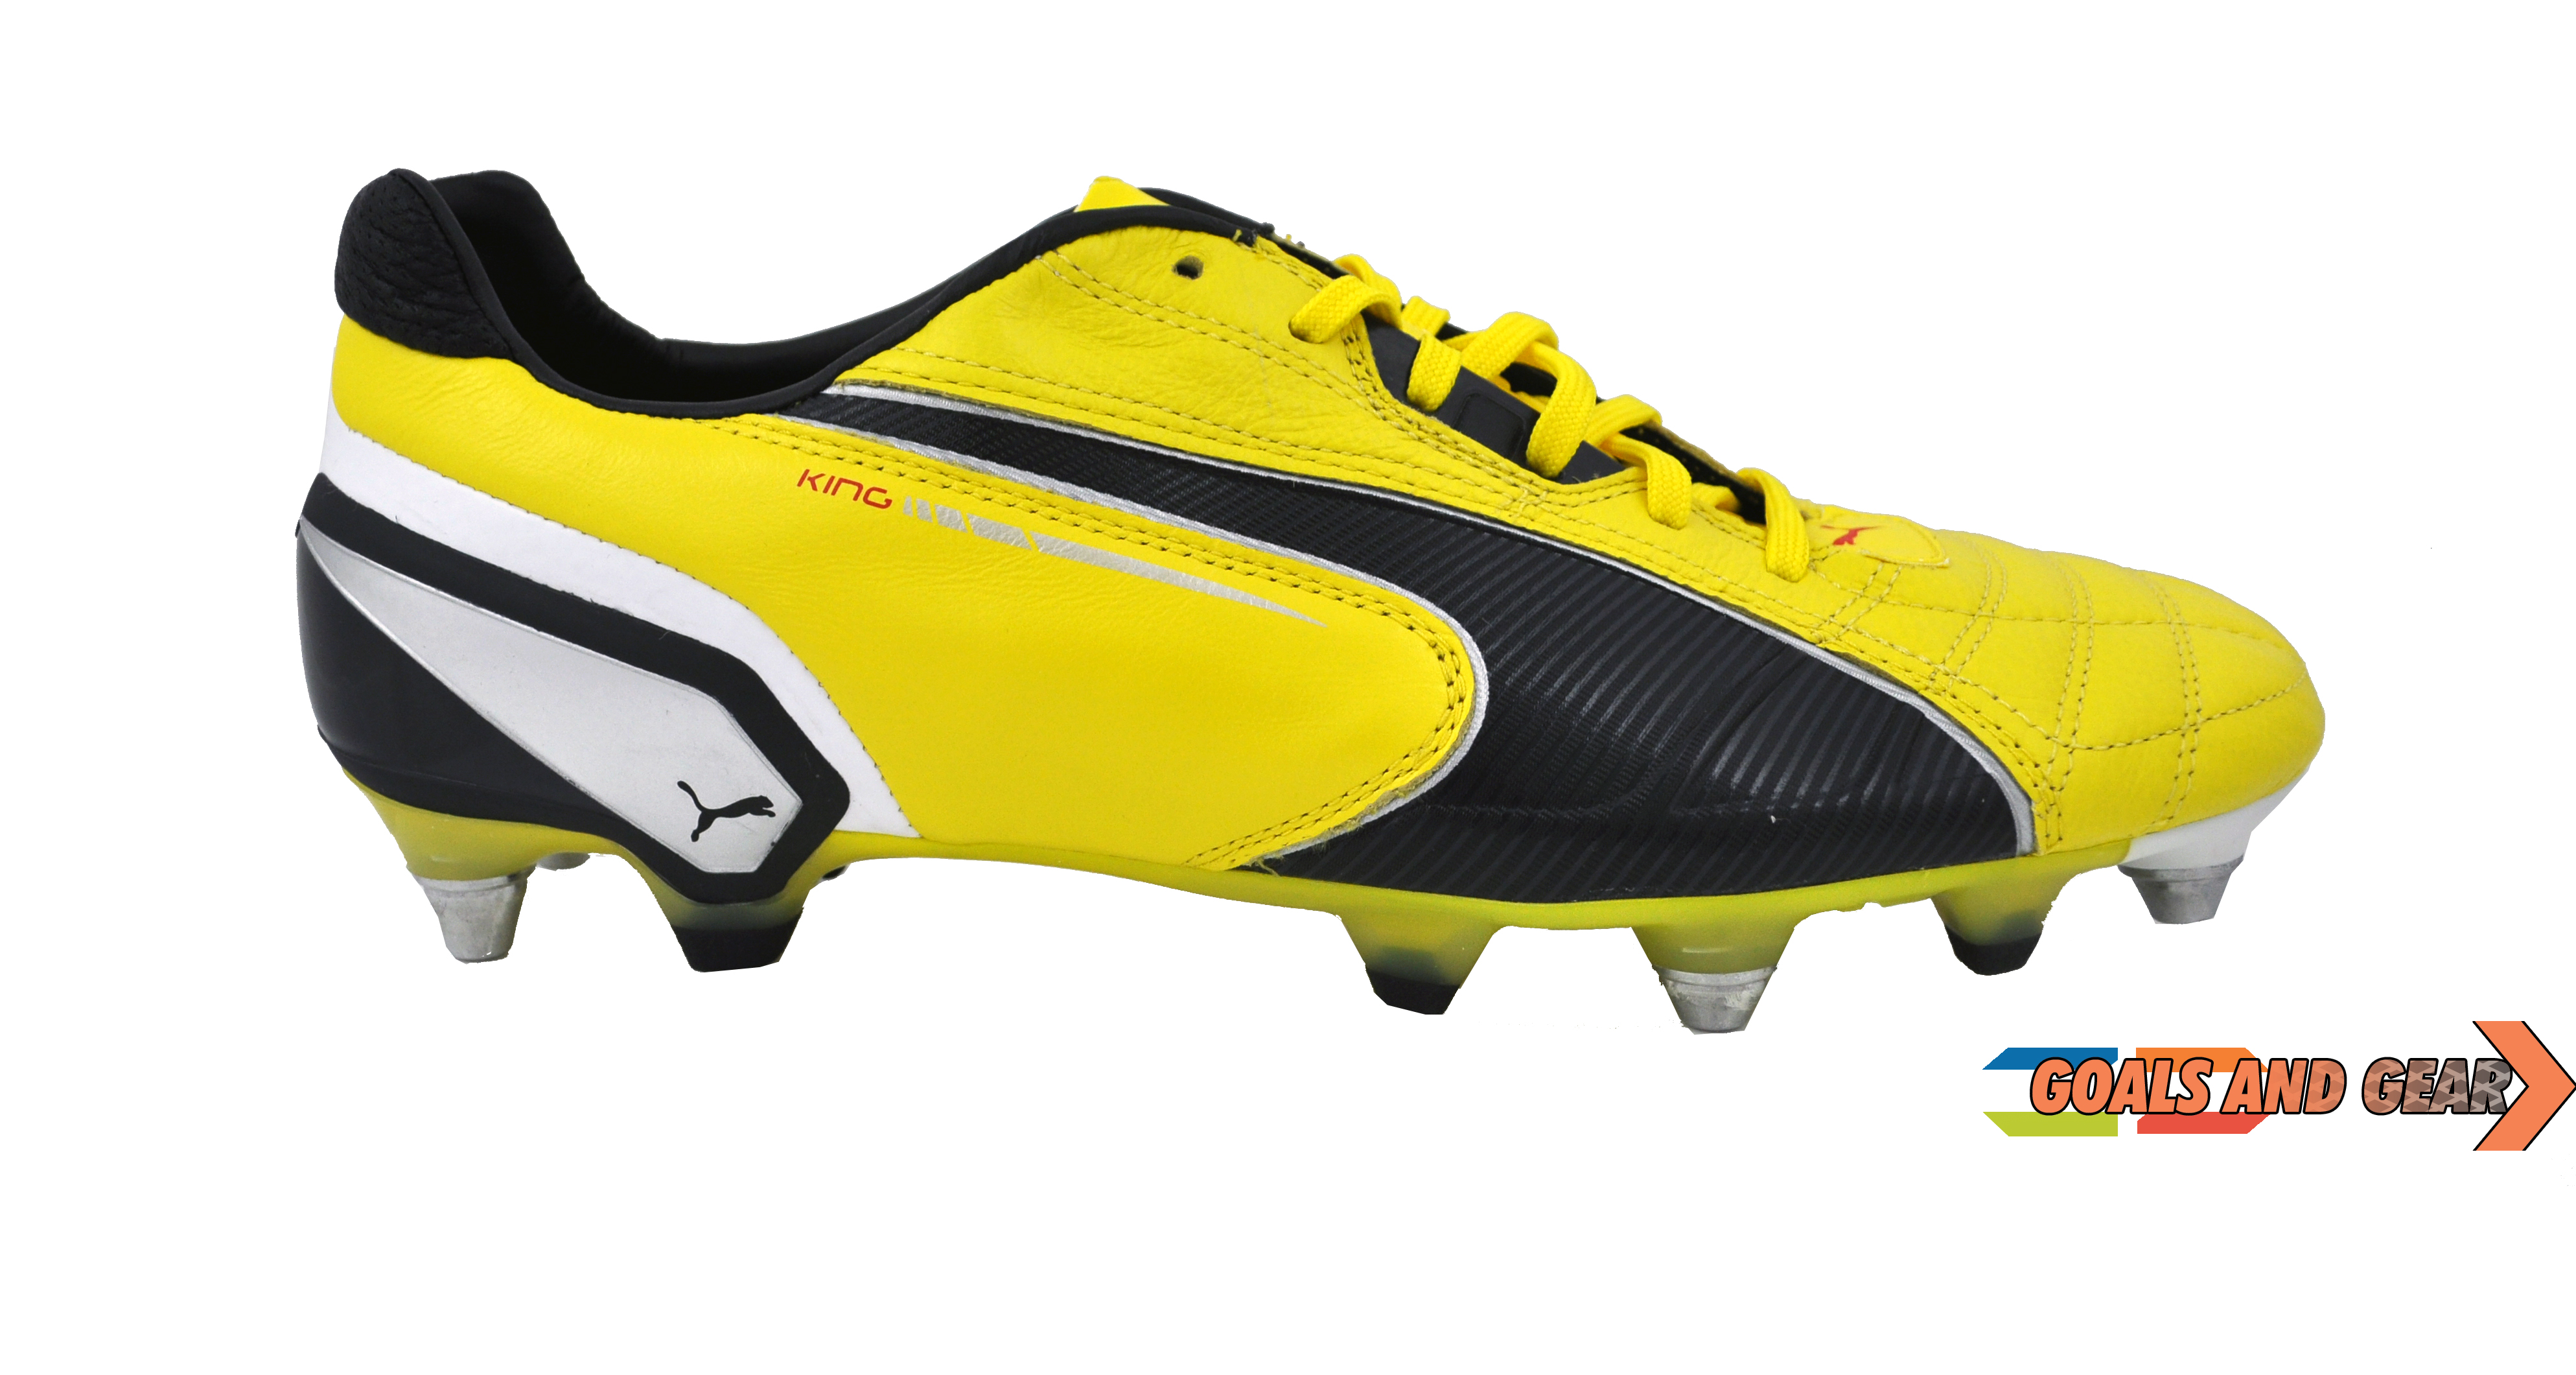 puma king boots Sale,up to 53% Discounts